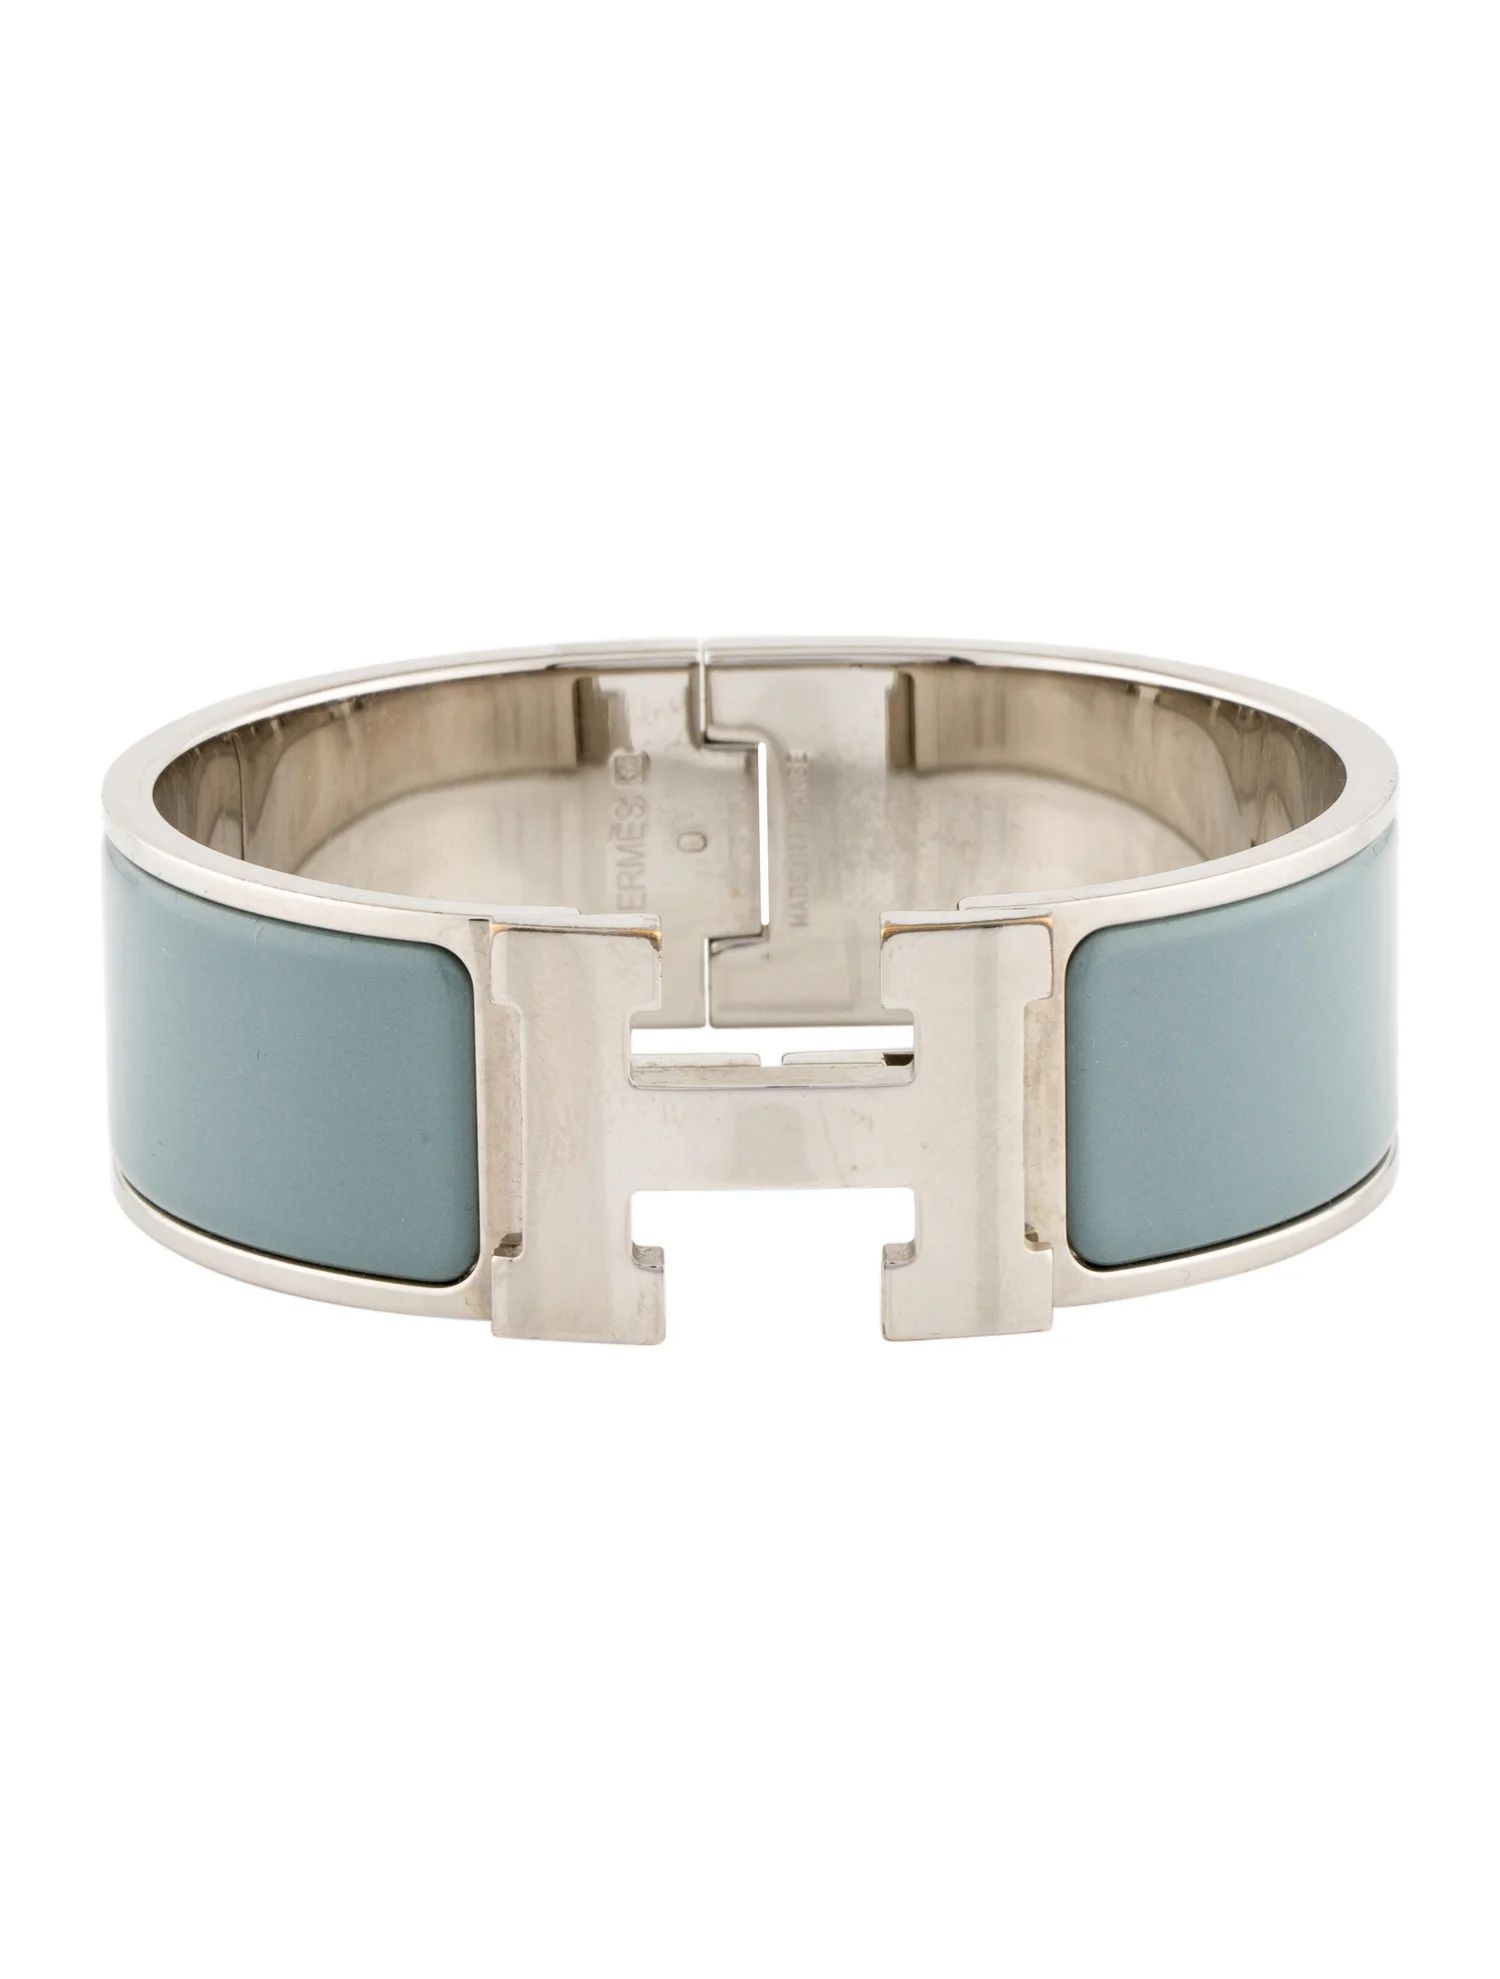 Clic Clac H Bracelet | The RealReal